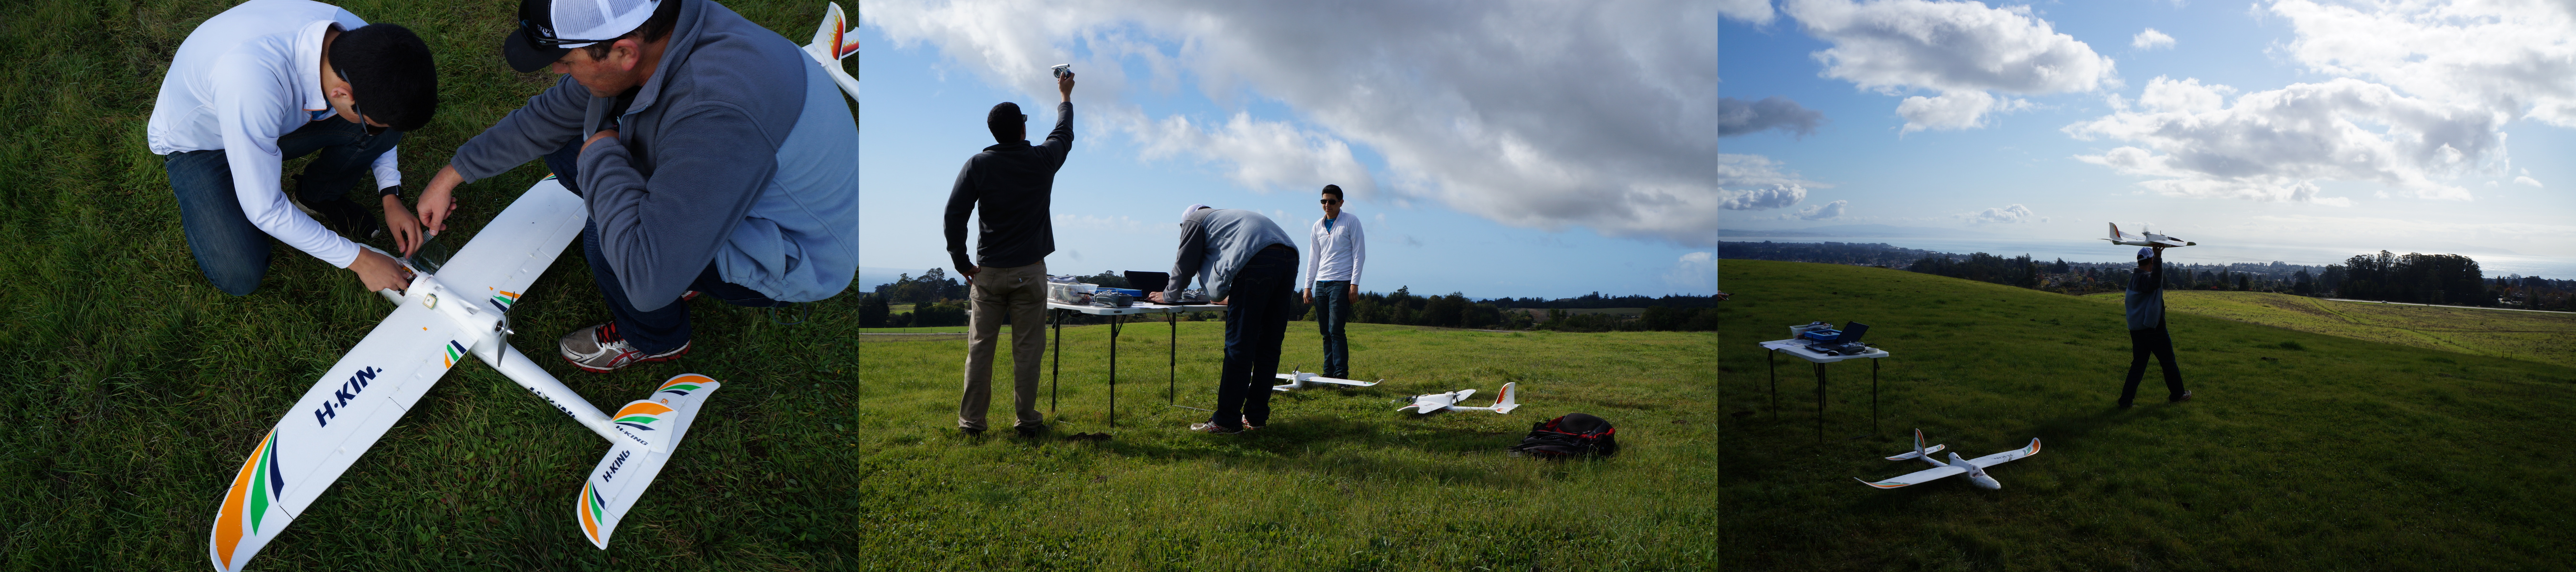 UCSC Researchers prepare to launch a fixed wing drone